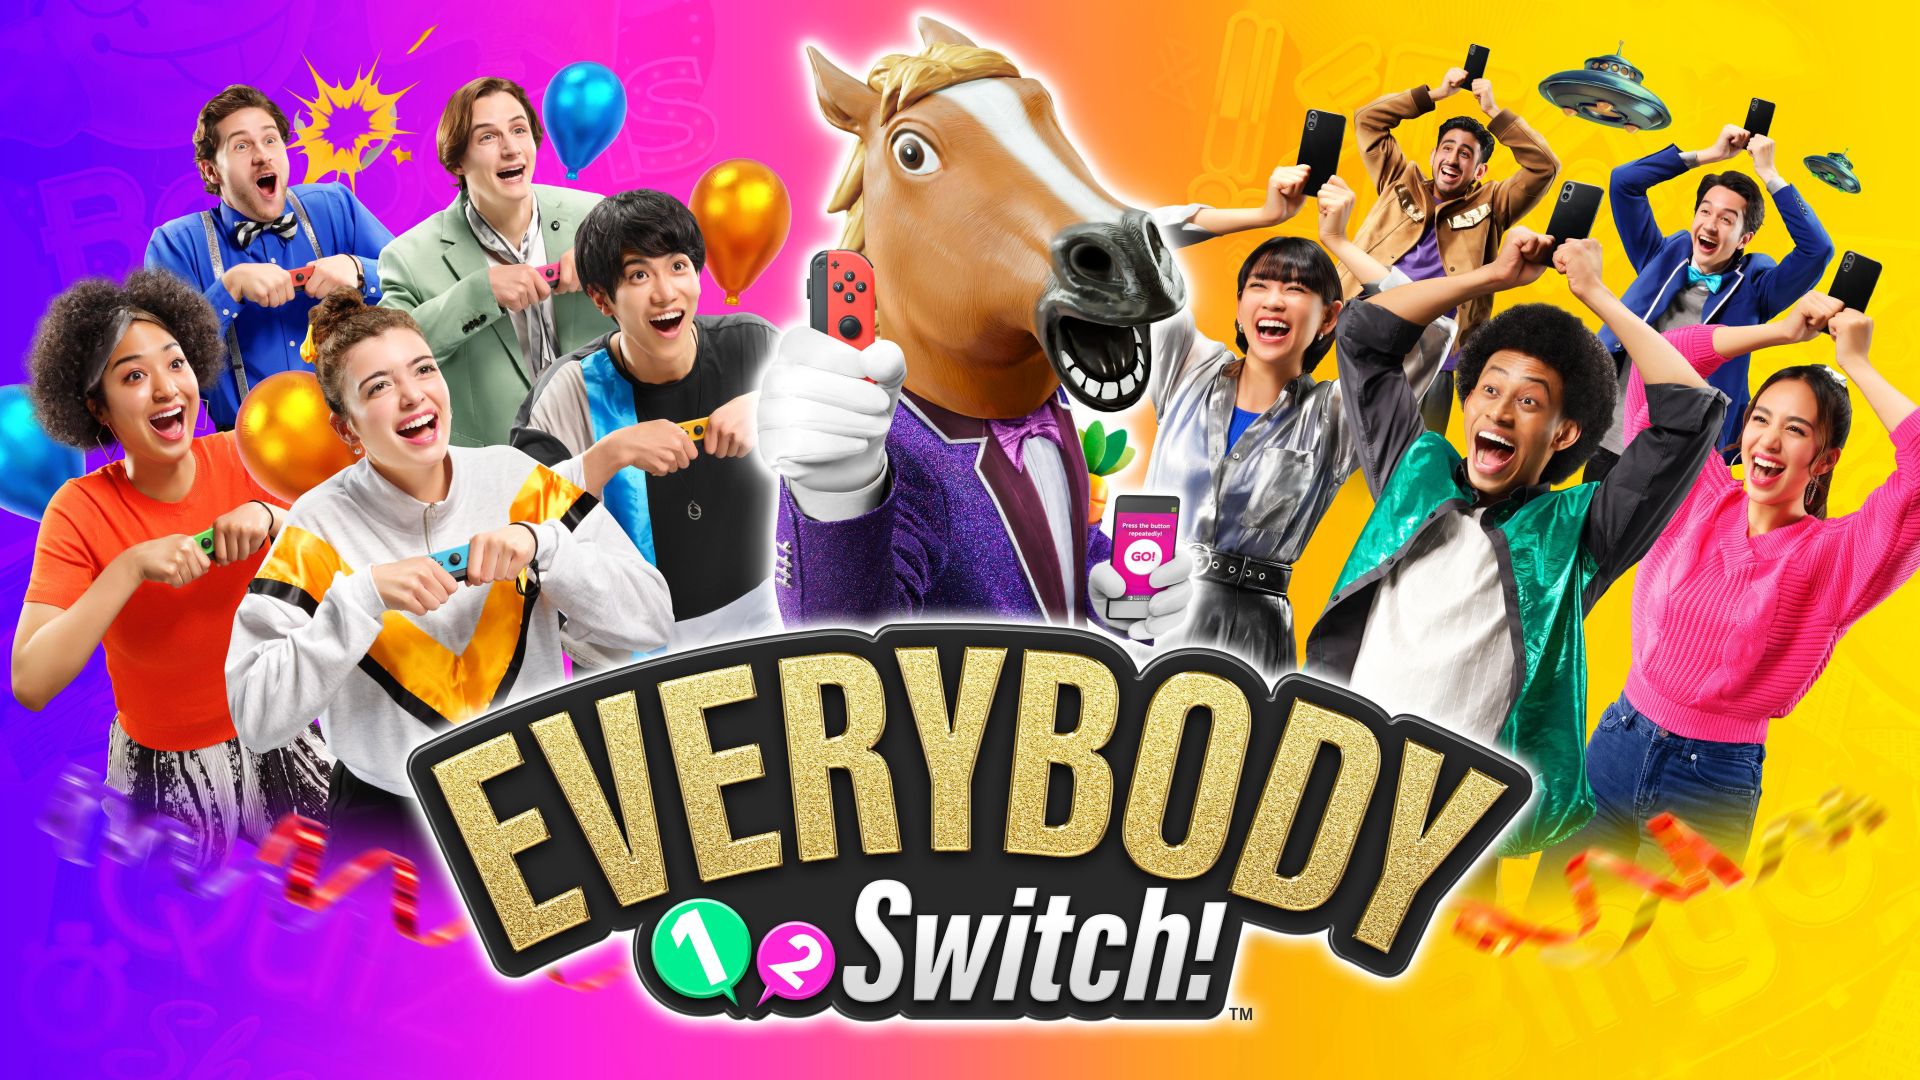 Everybody 1-2-Switch! Trailer Showcases All 17 Mini-Games